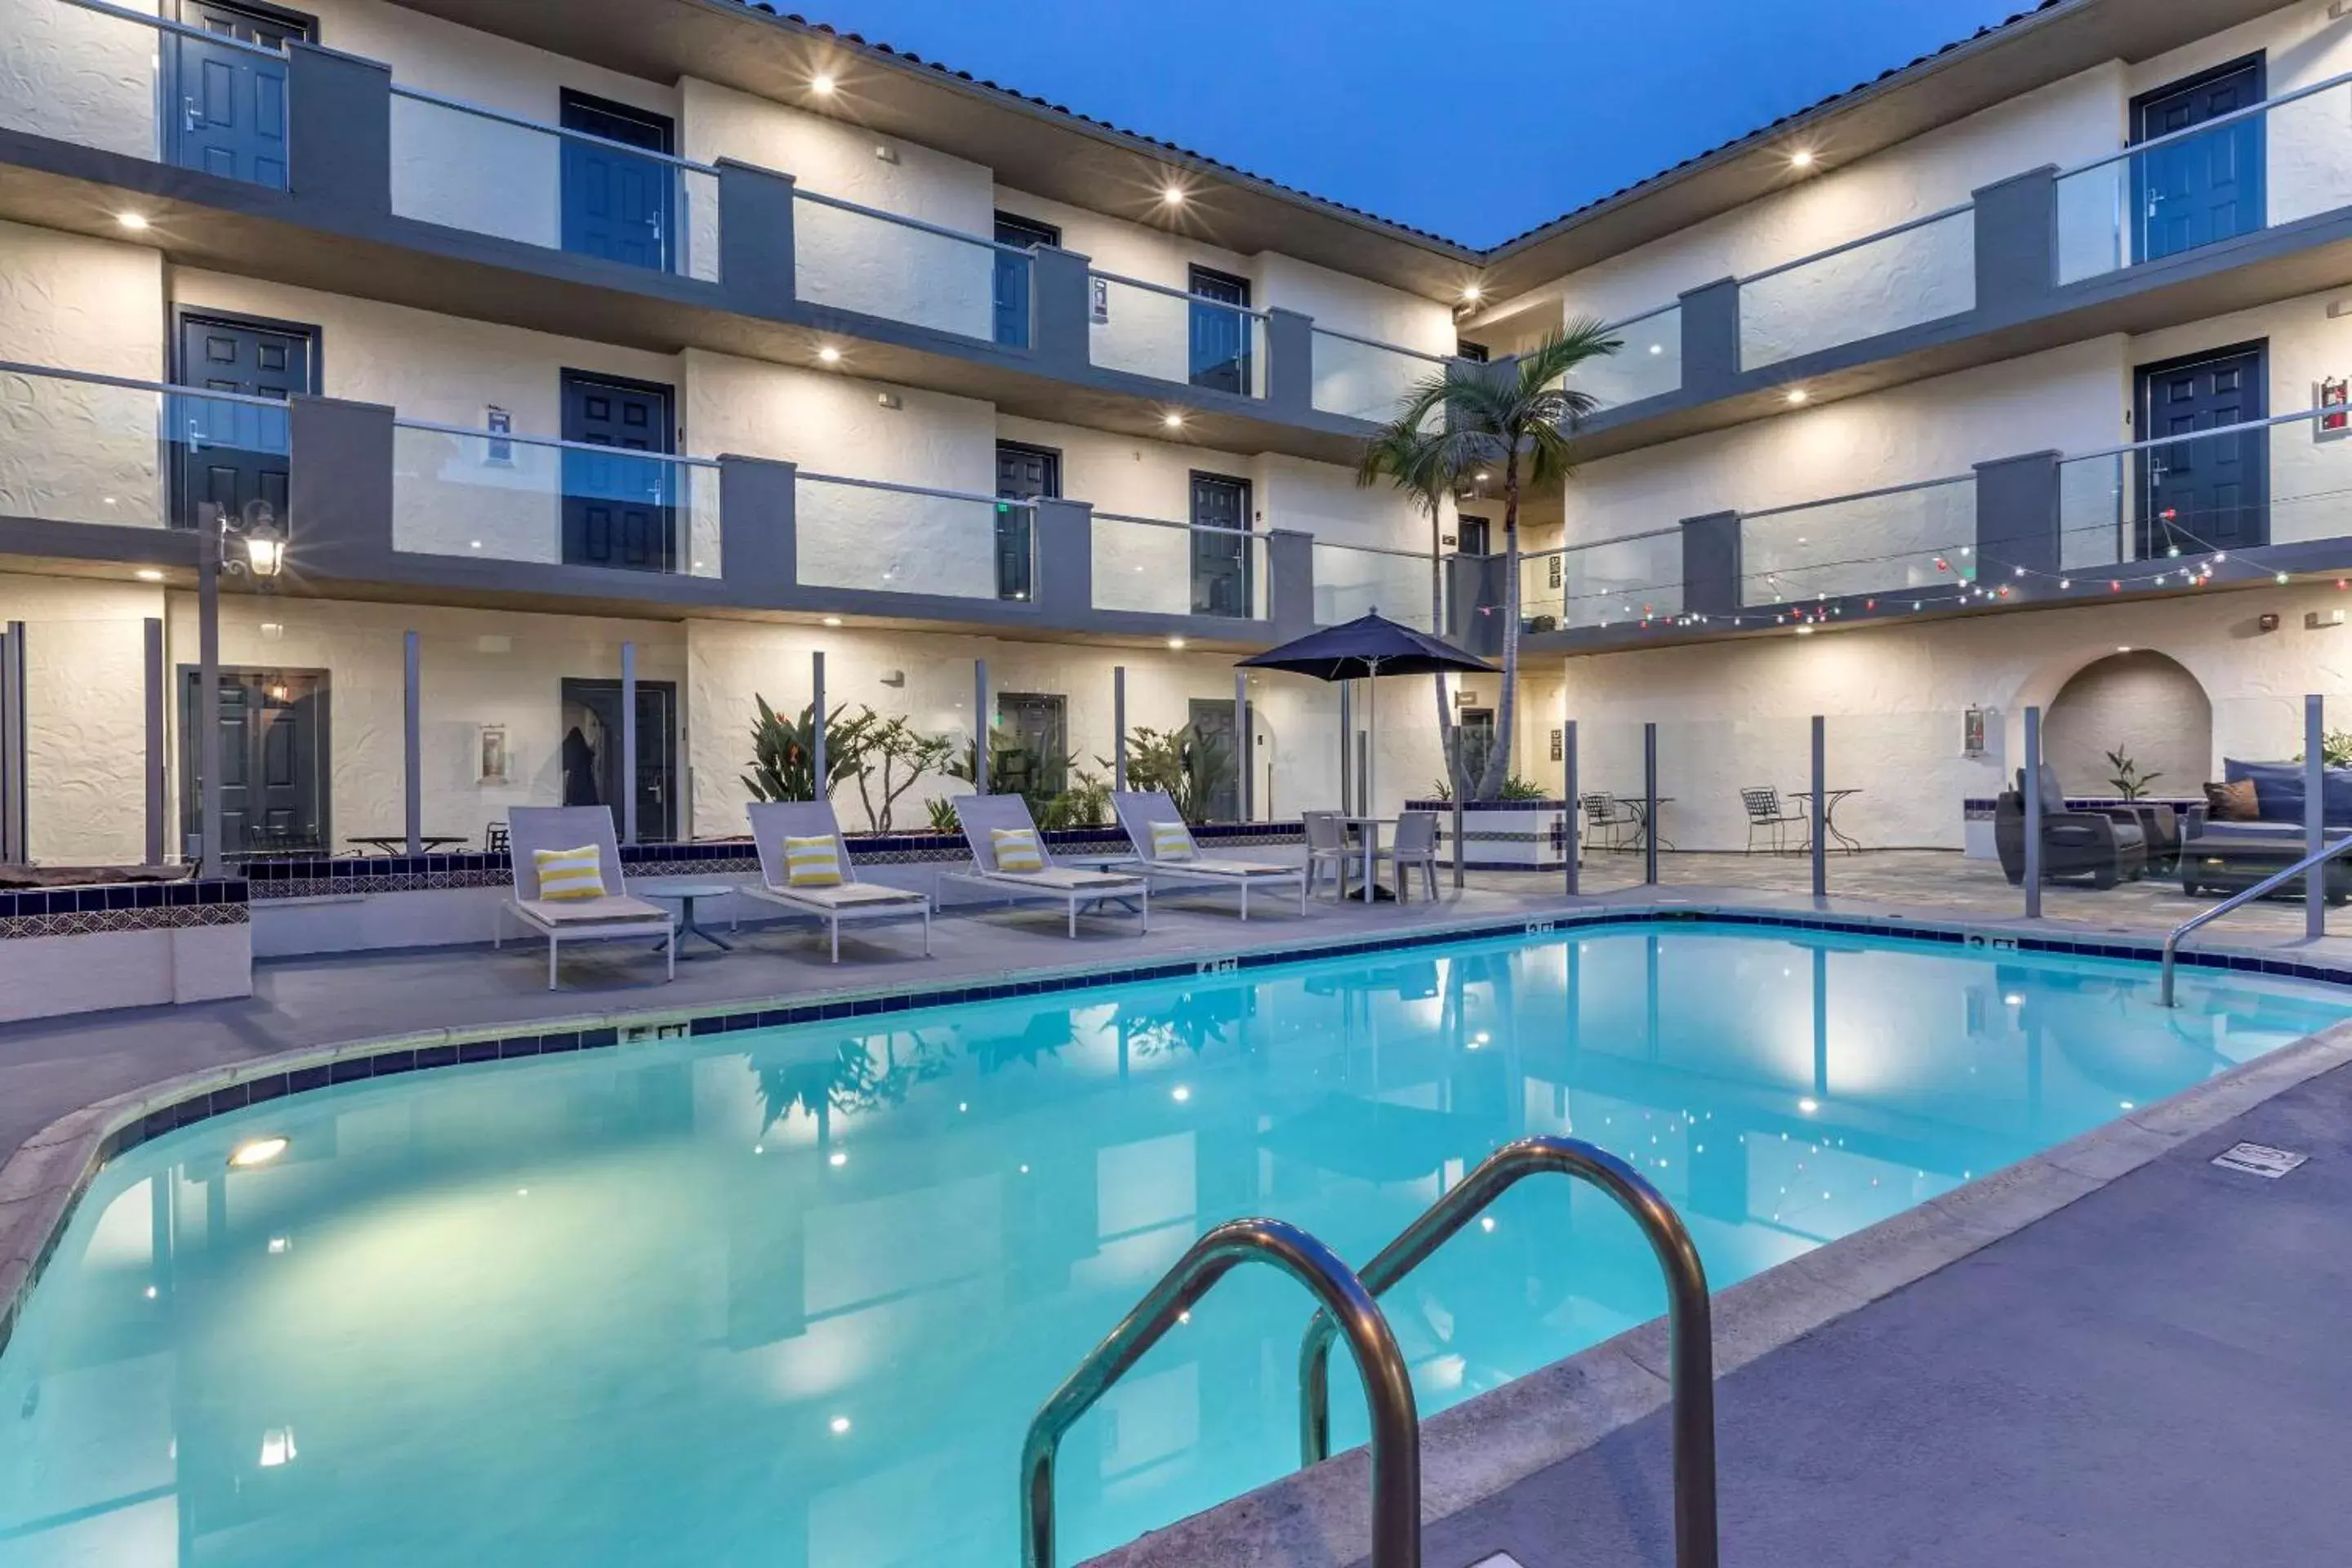 On site, Swimming Pool in Comfort Inn San Diego Old Town